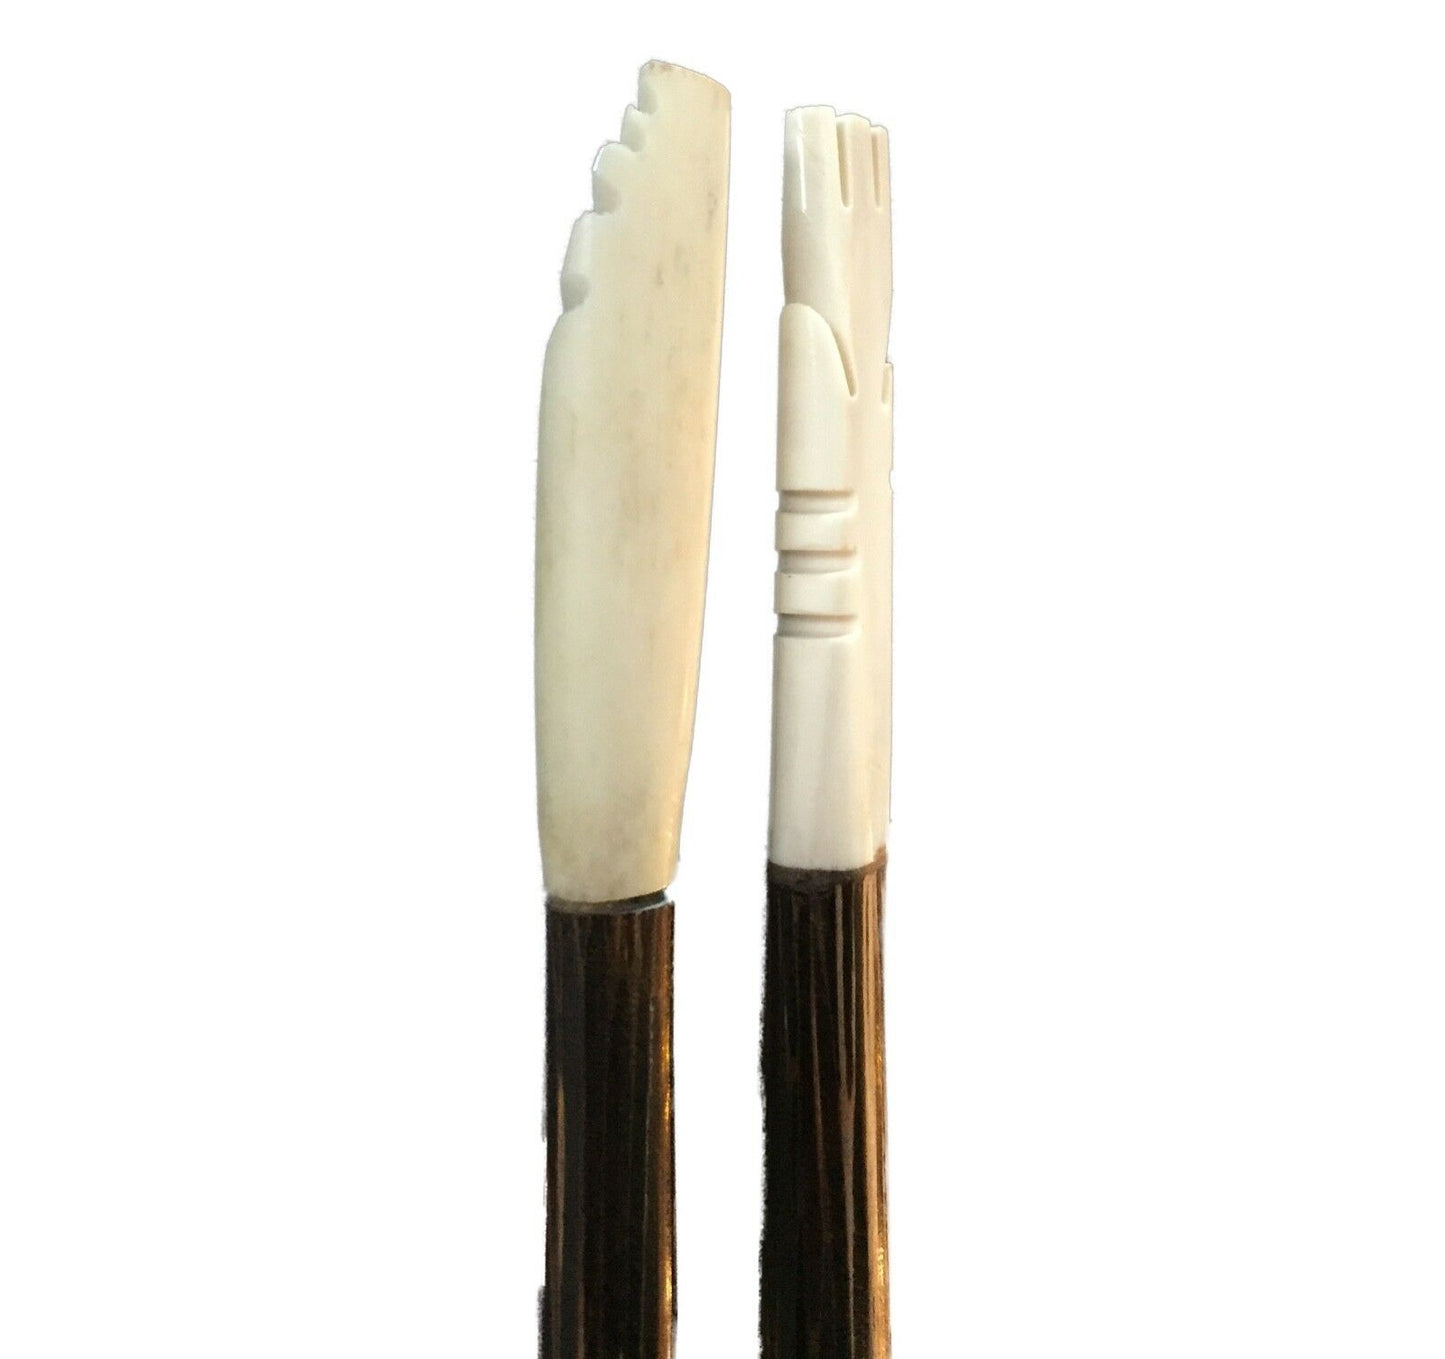 #2000 Ethnic Coconut Wood and Bone Hair Pins S/2